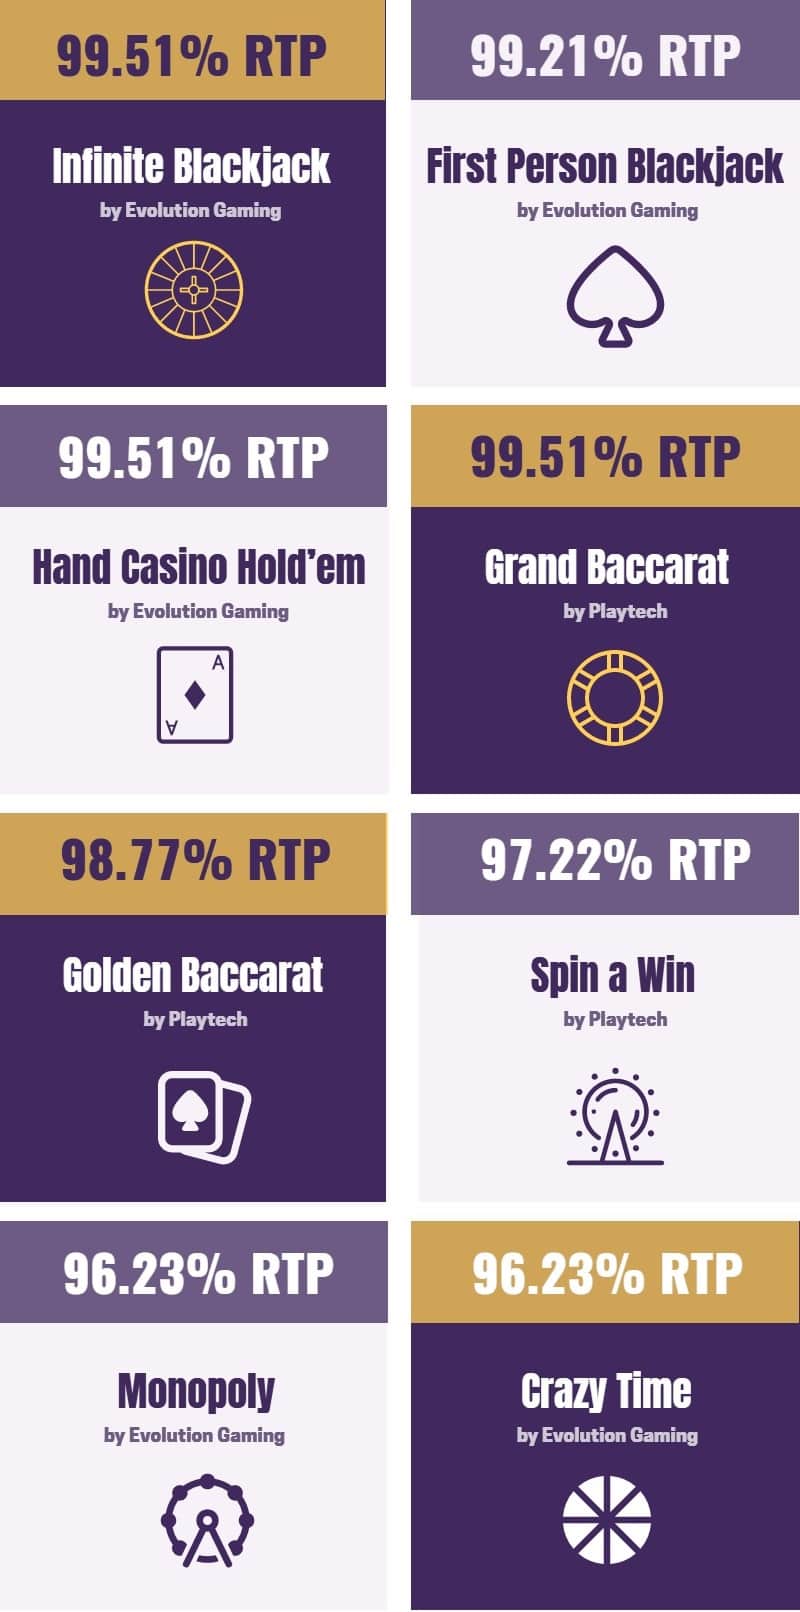 Infographic showing live casino games with highest Return to Player Percentage